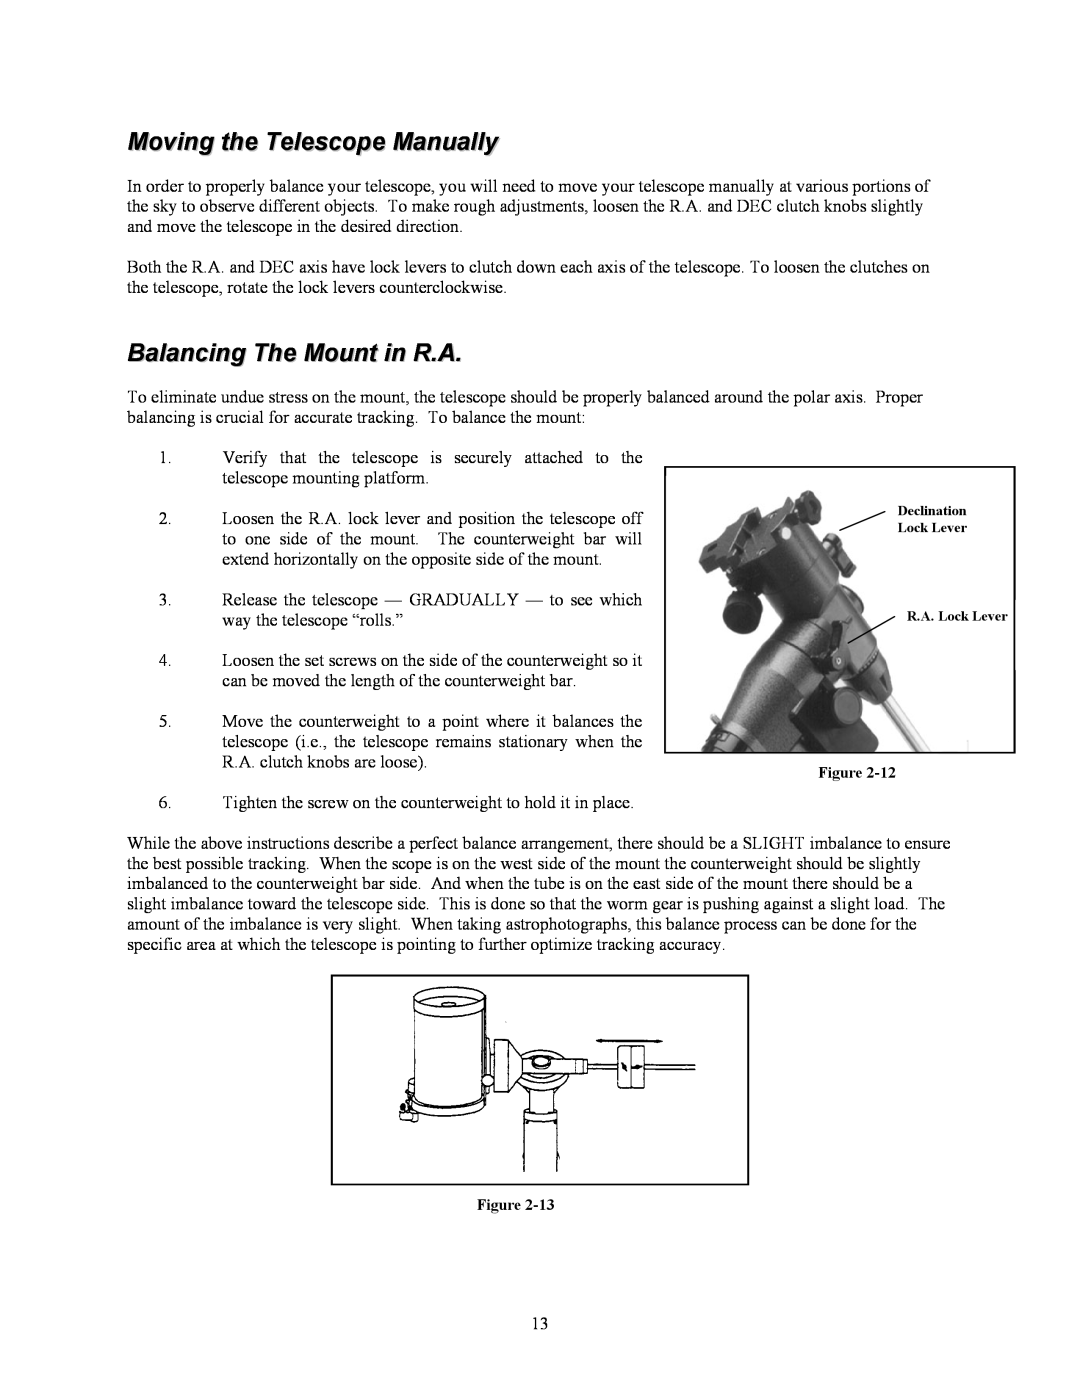 Celestron C9-S, C8-S, C5-S instruction manual Moving the Telescope Manually, Balancing The Mount in R.A 